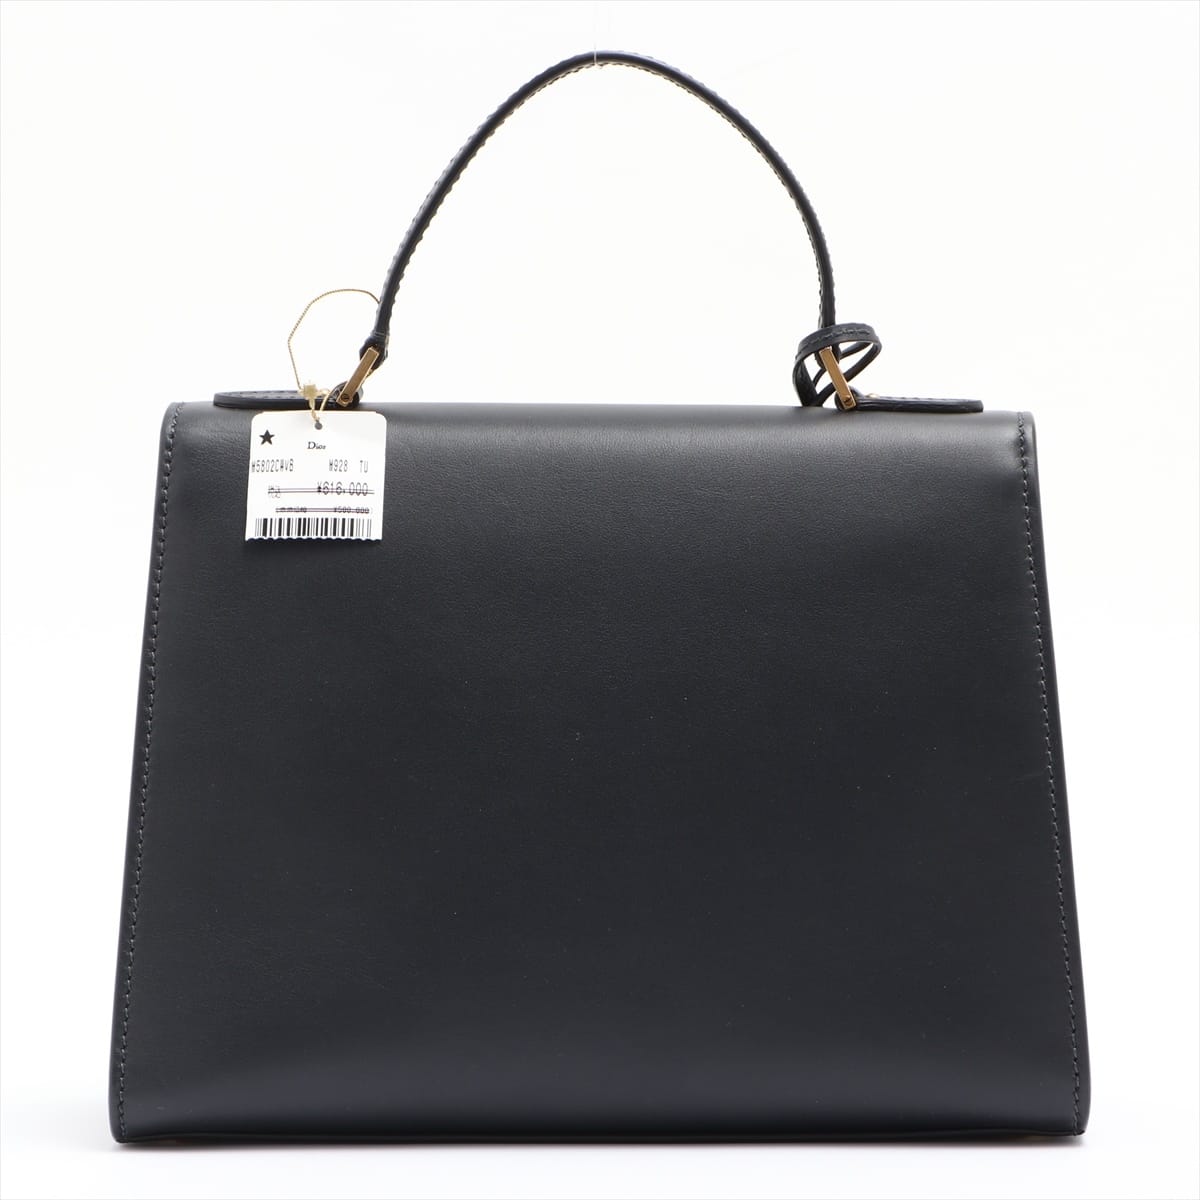 Christian Dior Addict Leather Hand bag Black open papers